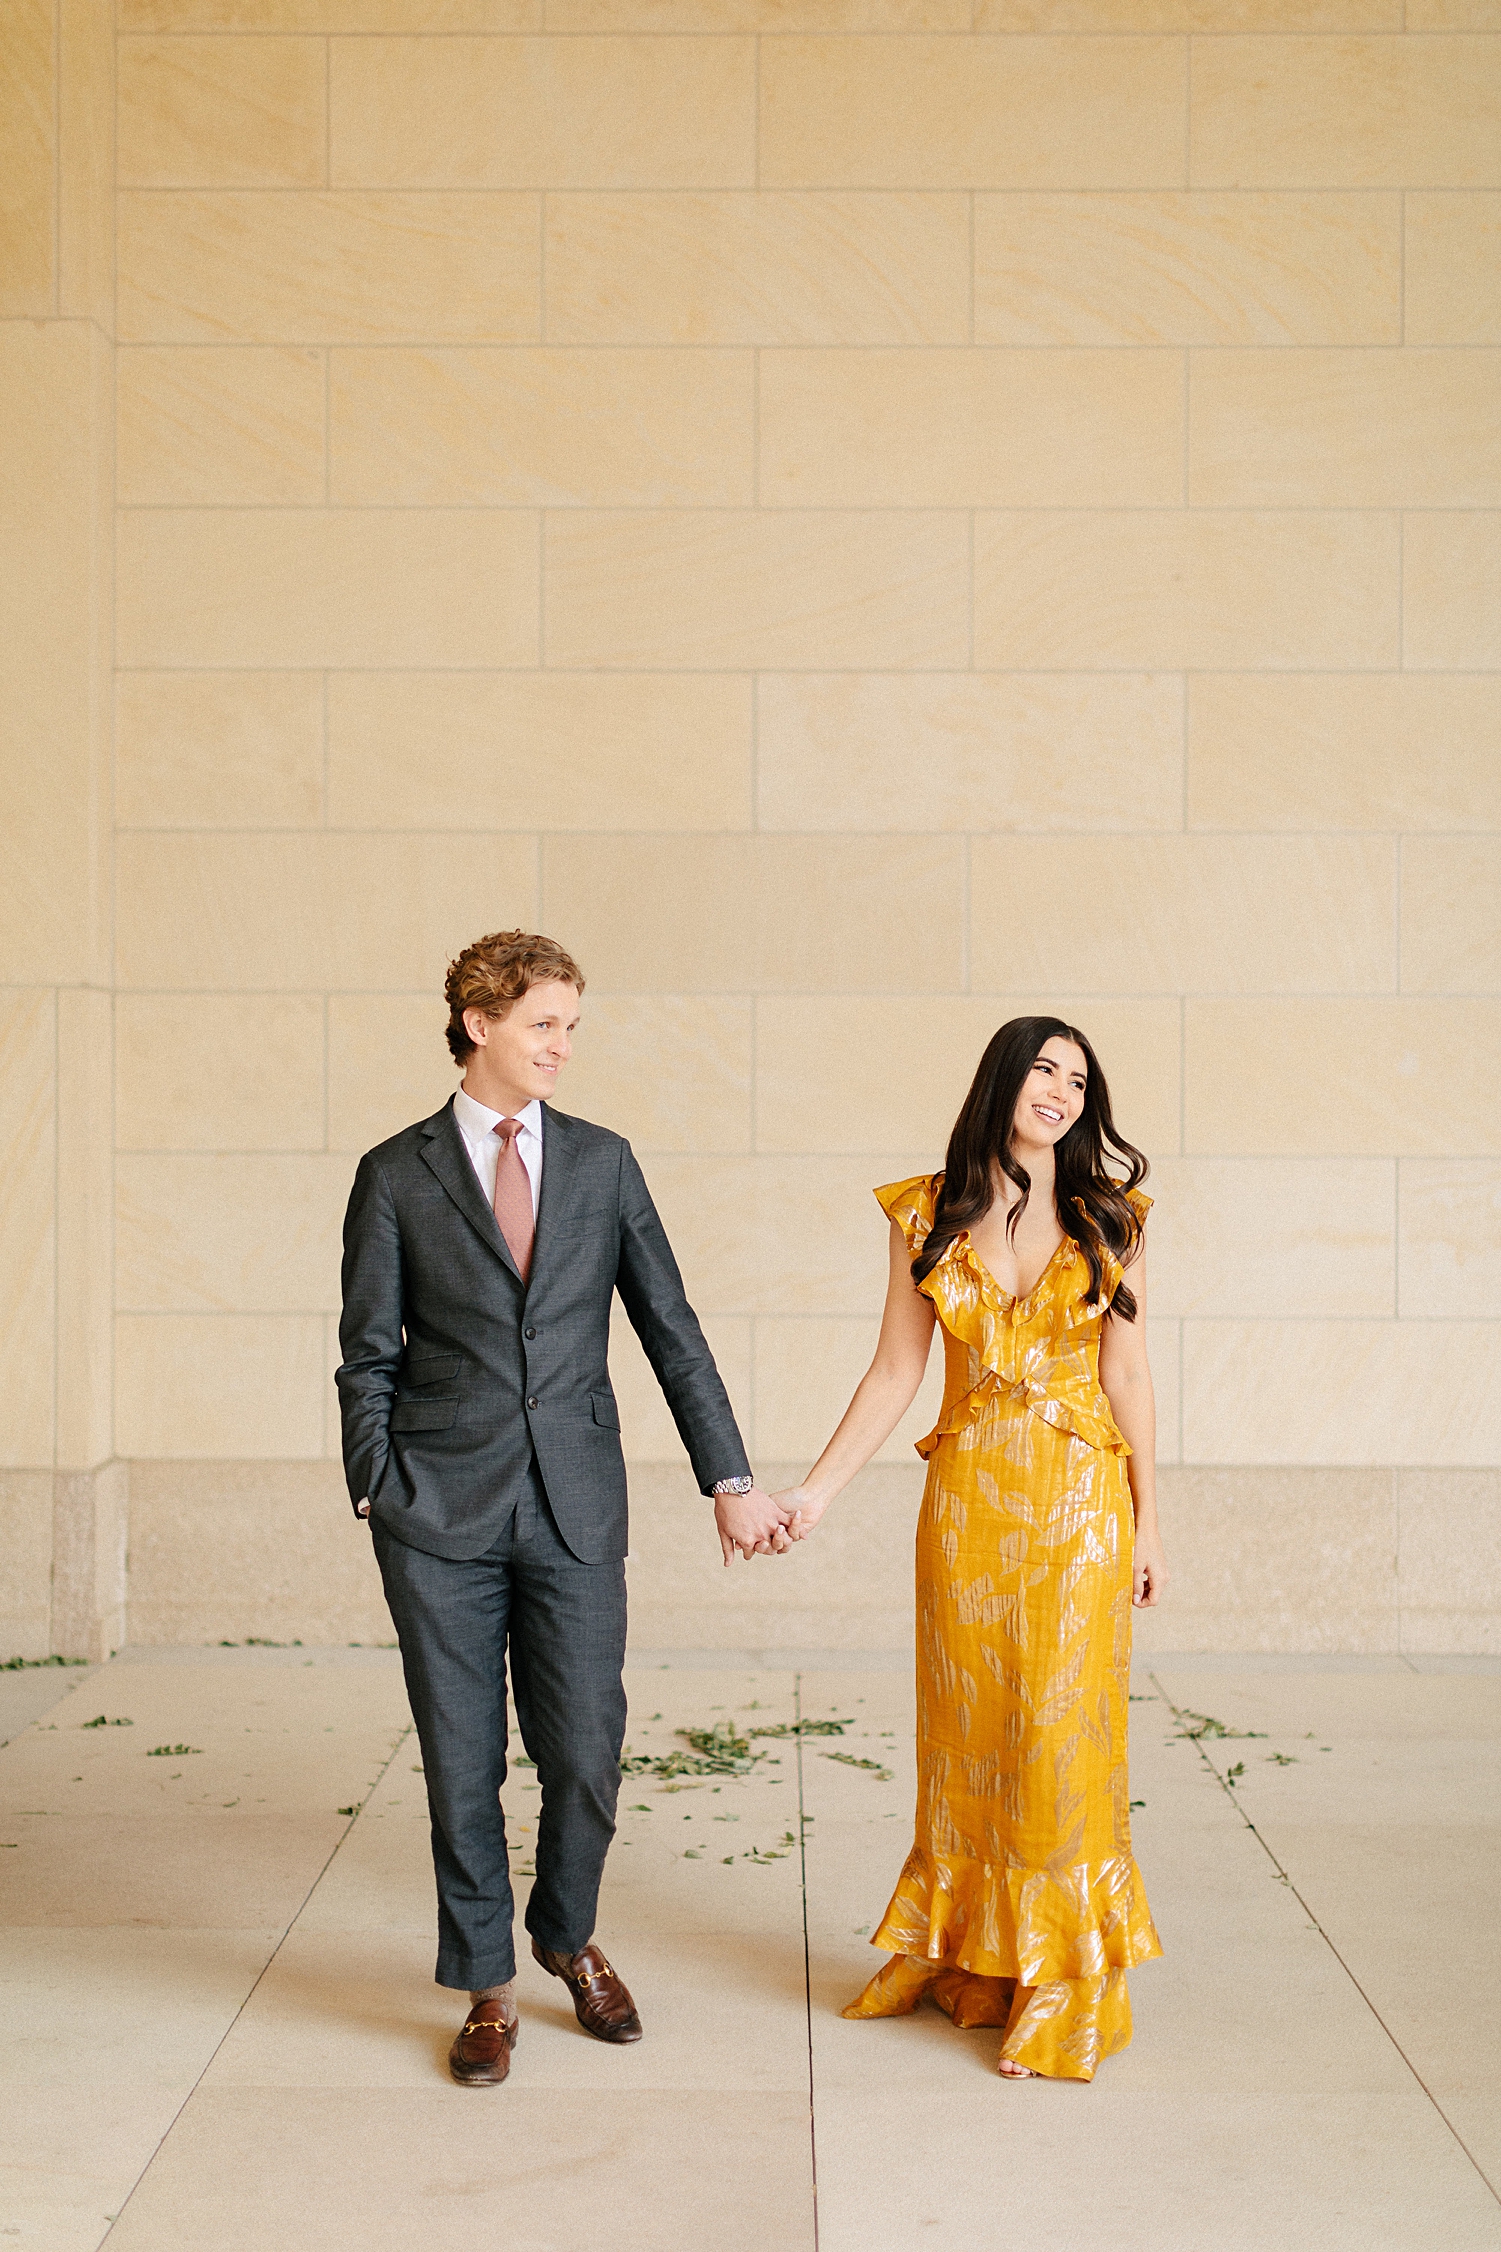 woman in yellow dress holding hands with man in suit in front of stone wall engagement smiling